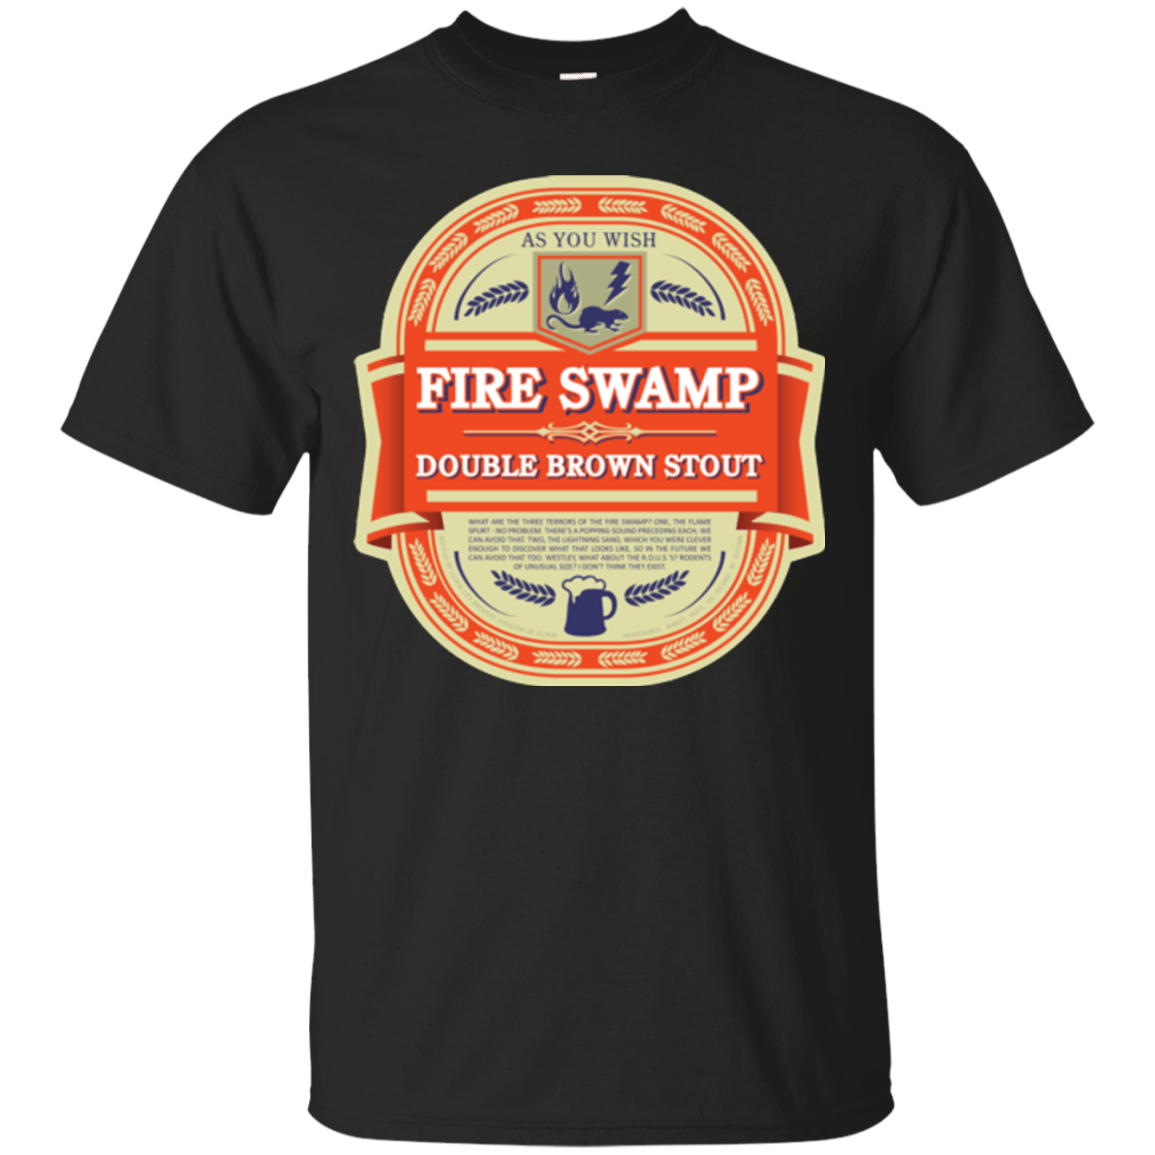 T-Shirts Black / Small Fire Swamp Ale T-Shirt